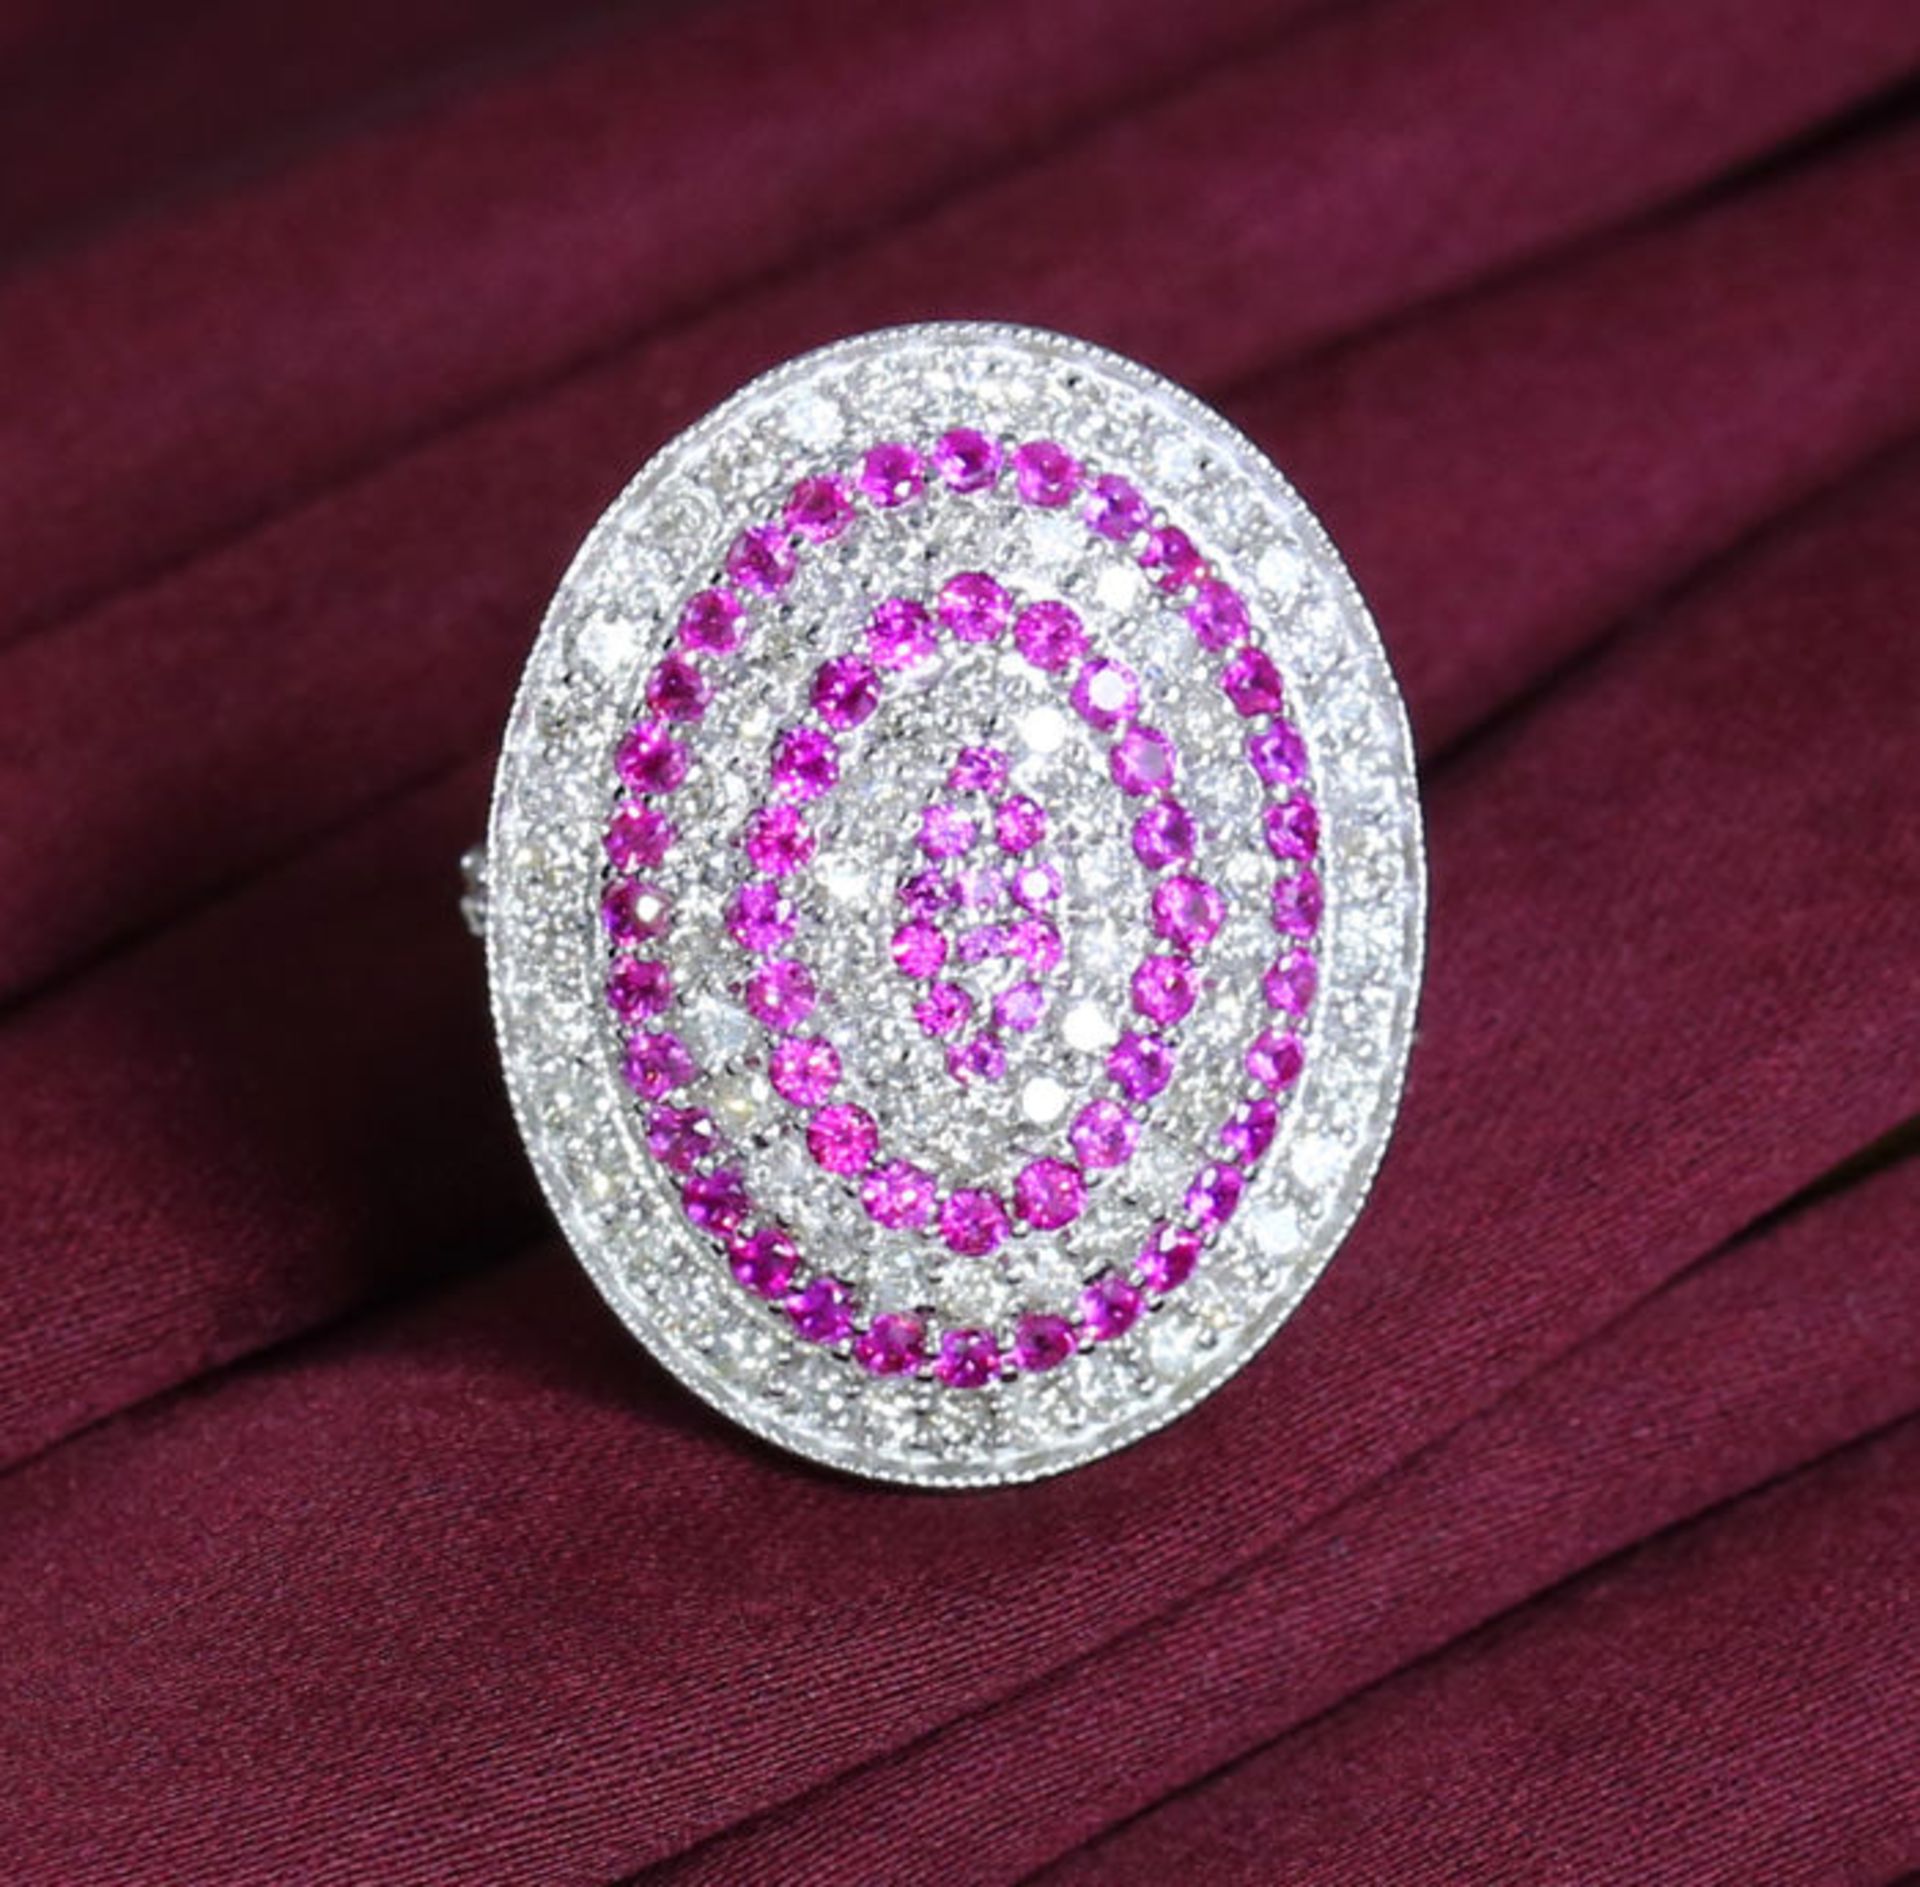 14 K / 585 Very Exclusive White Gold Diamond and Ruby Ring - Image 9 of 10